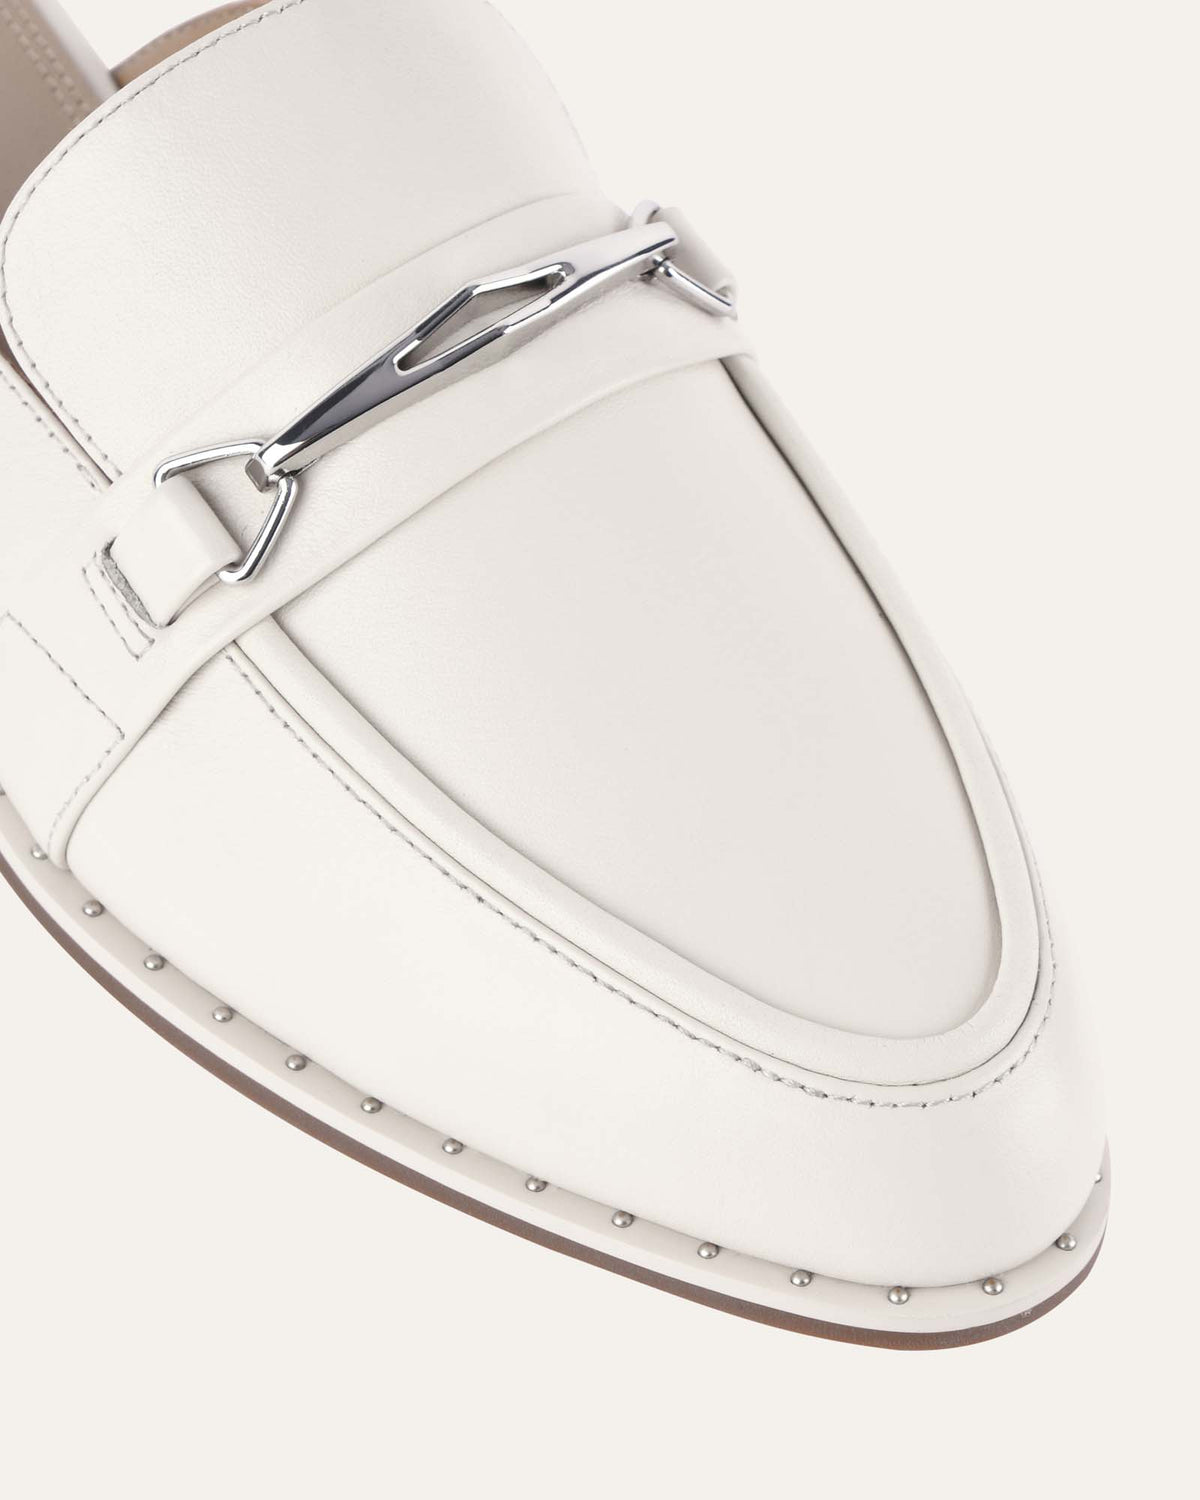 MISSION LOAFERS OFF WHITE LEATHER